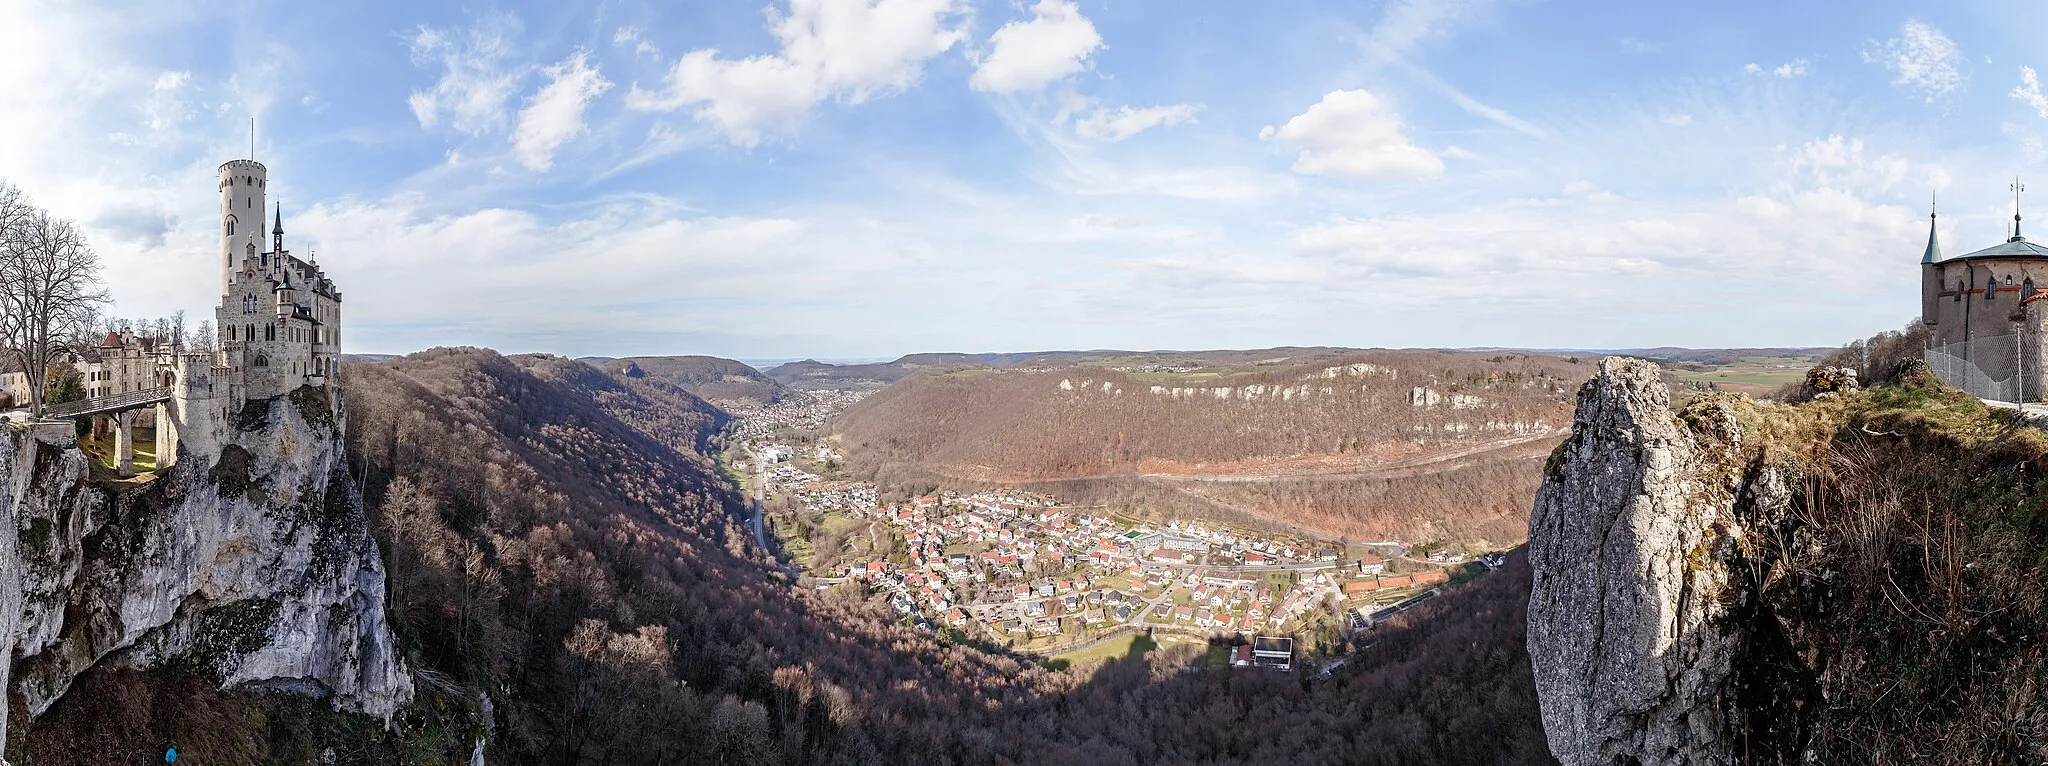 Photo showing: View of the municipality Lichtenstein with the districts Unterhausen and Honau in the Echaz valley  and the district Holzelfingen on the Traifelberg from the Lichtenstein Castle, Baden-Württemberg, Germany.